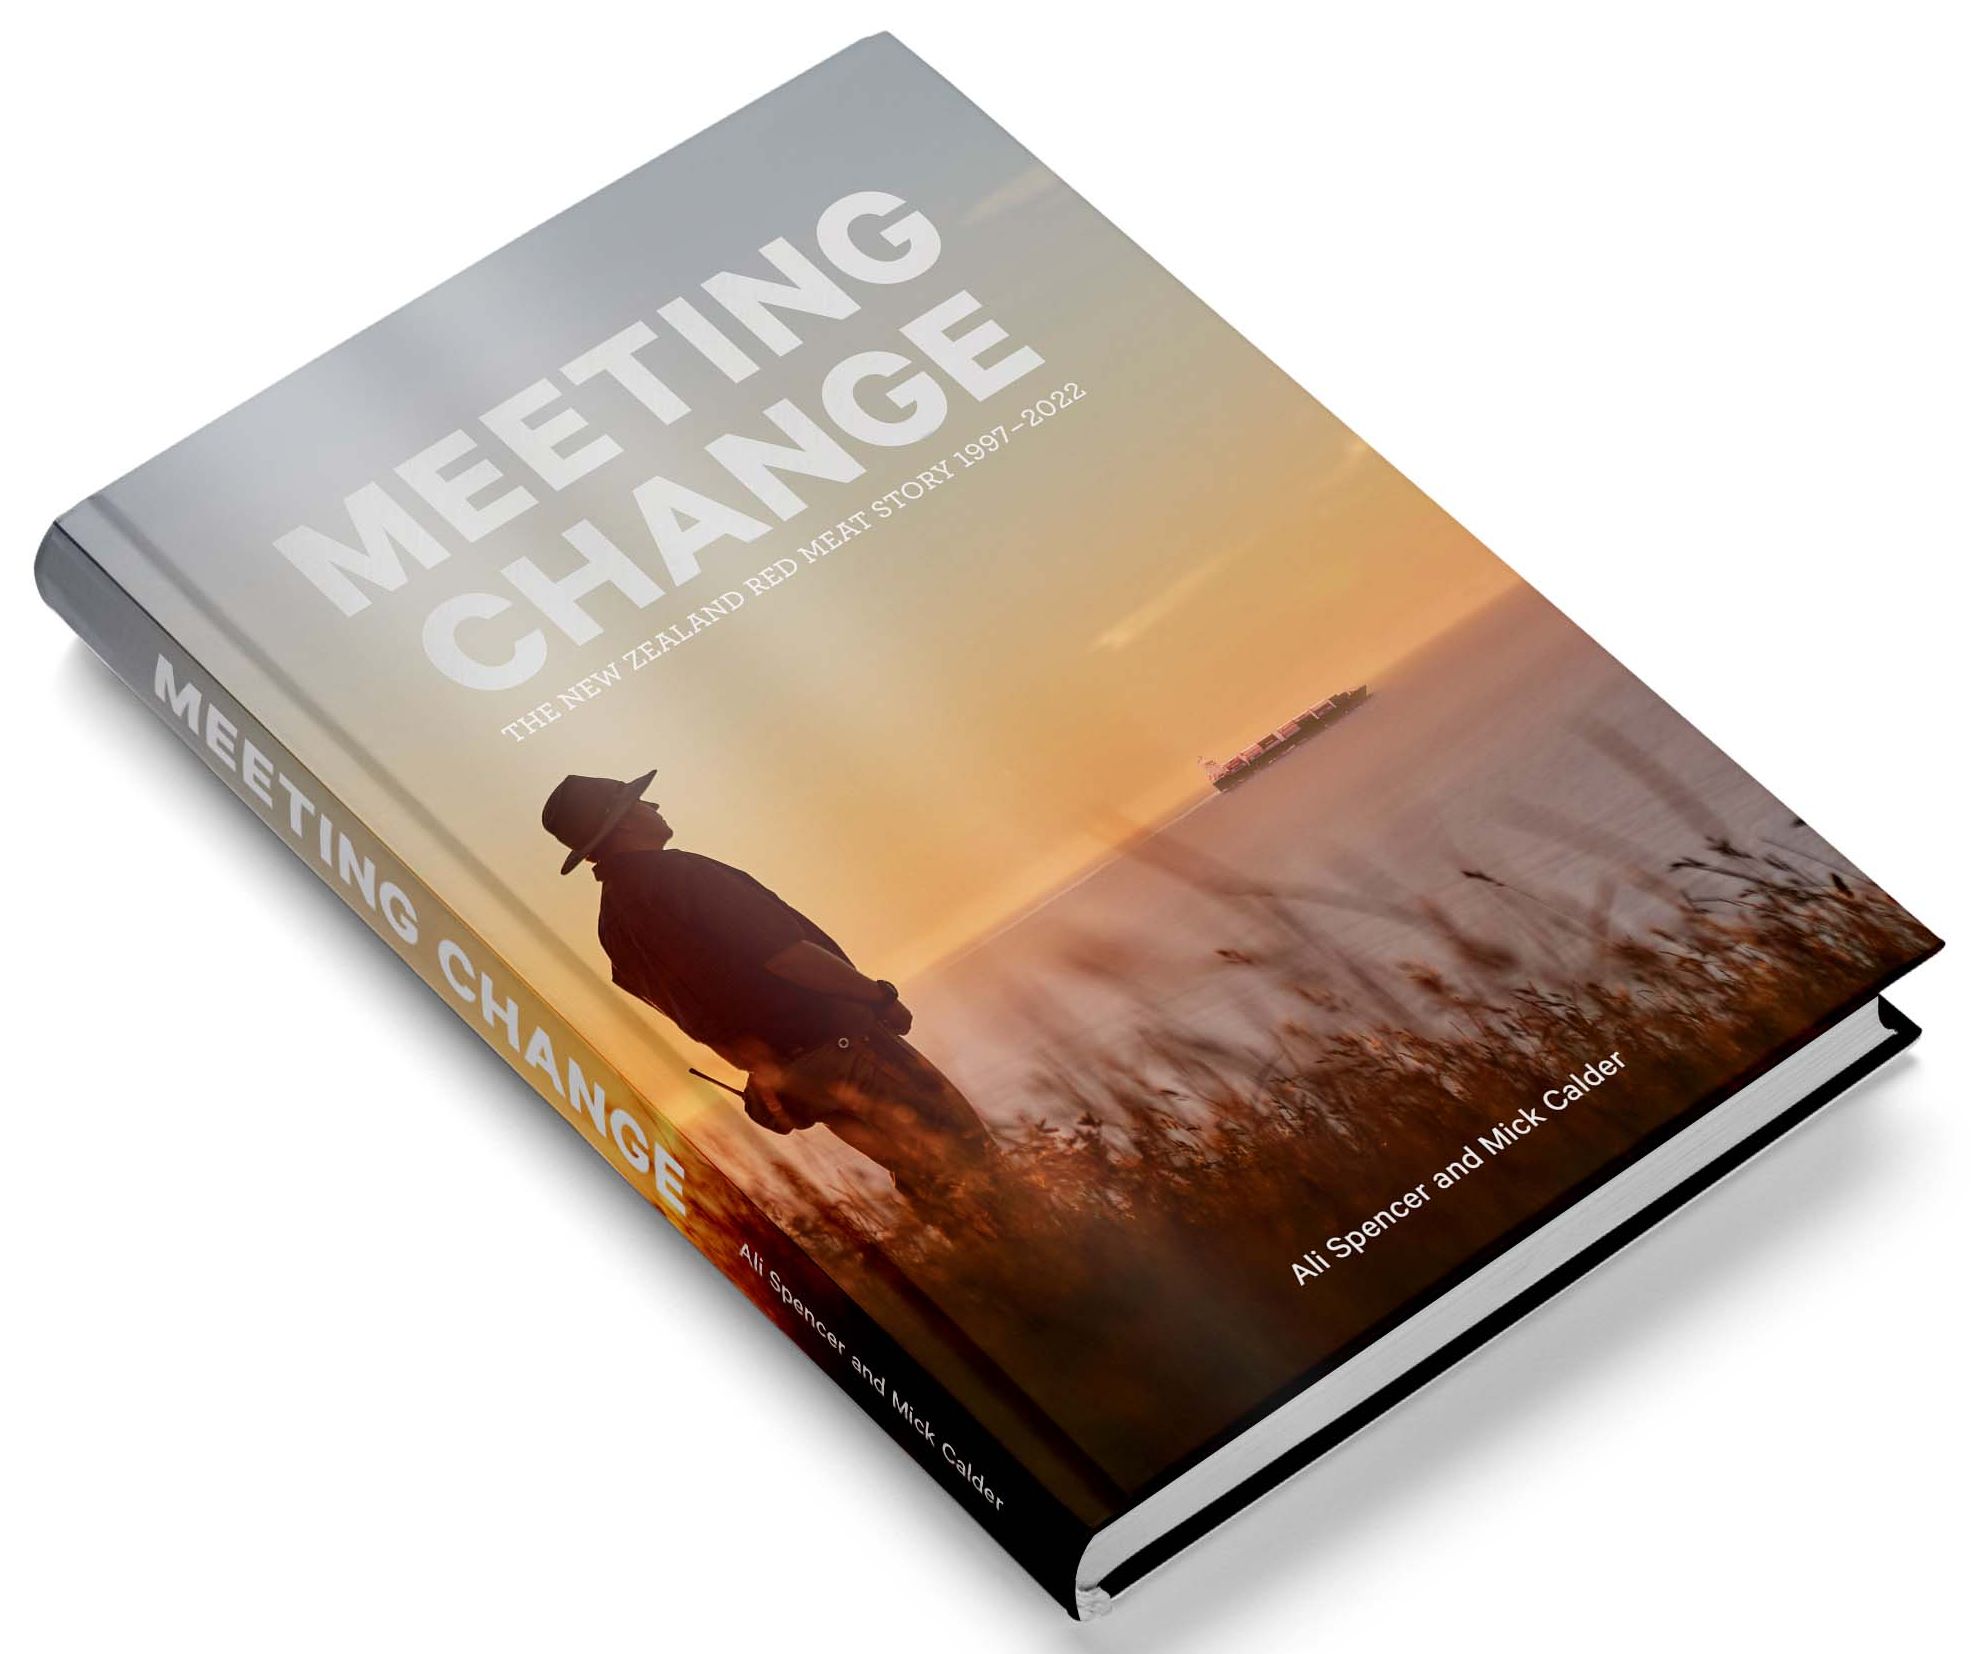 Meeting Change book cover